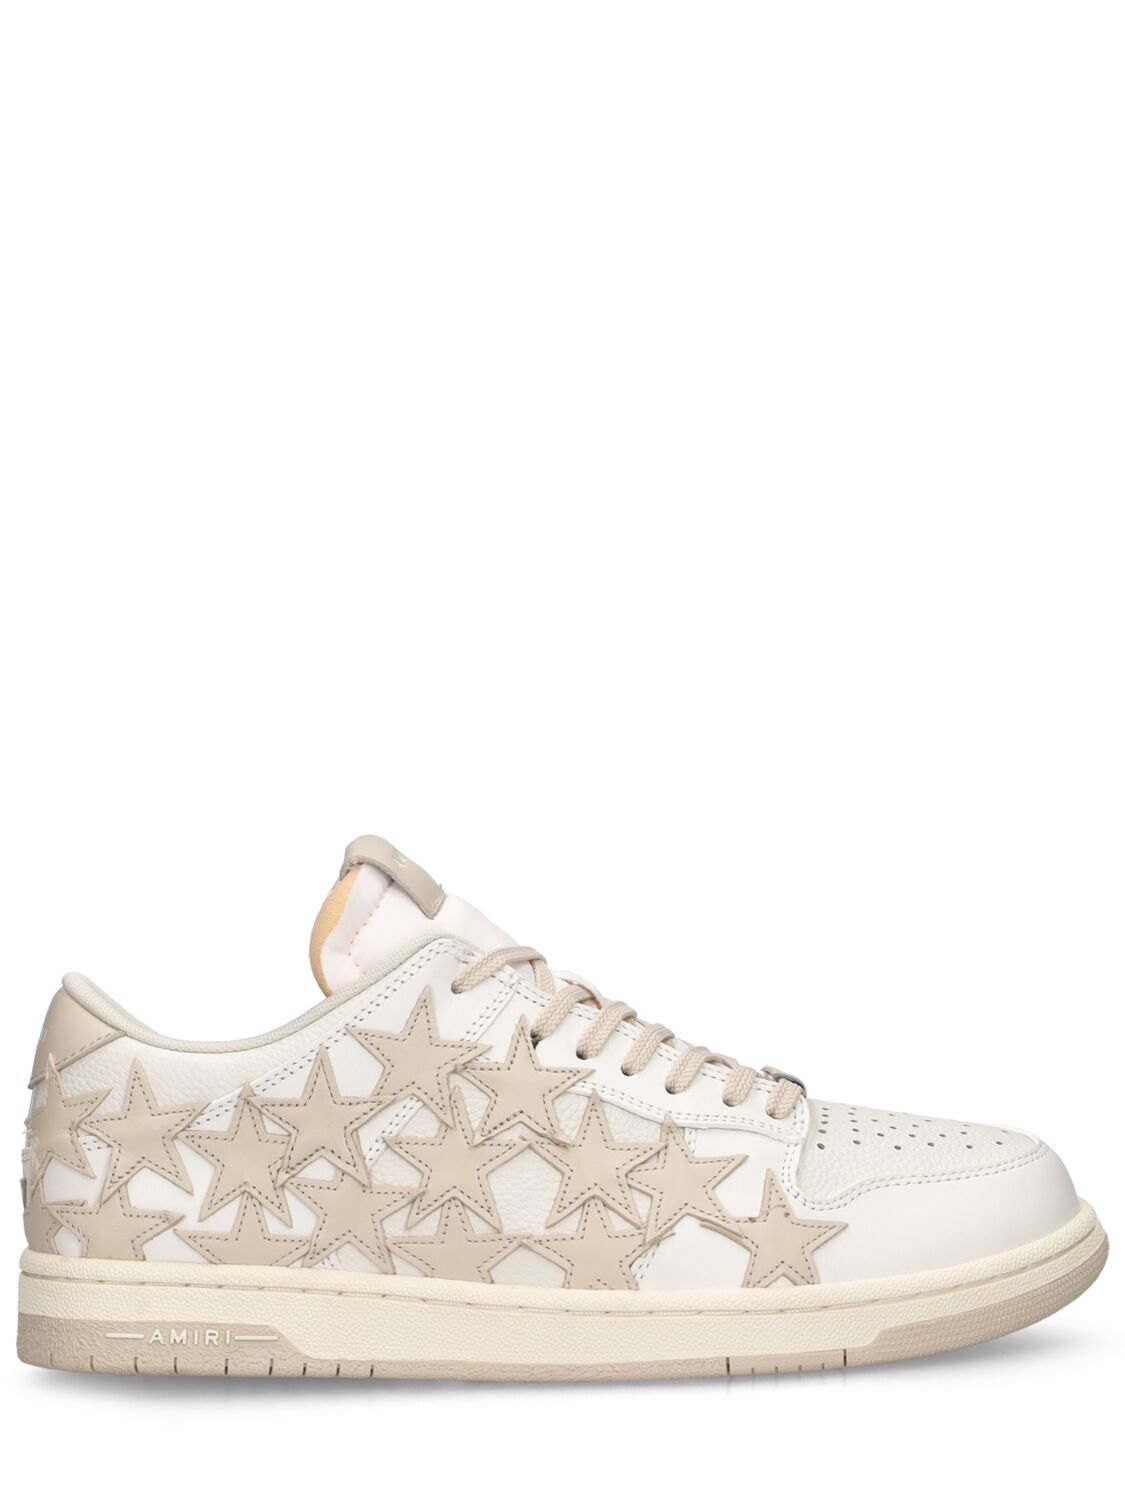 Amiri Stars Leather Low Top Sneakers In White,beige